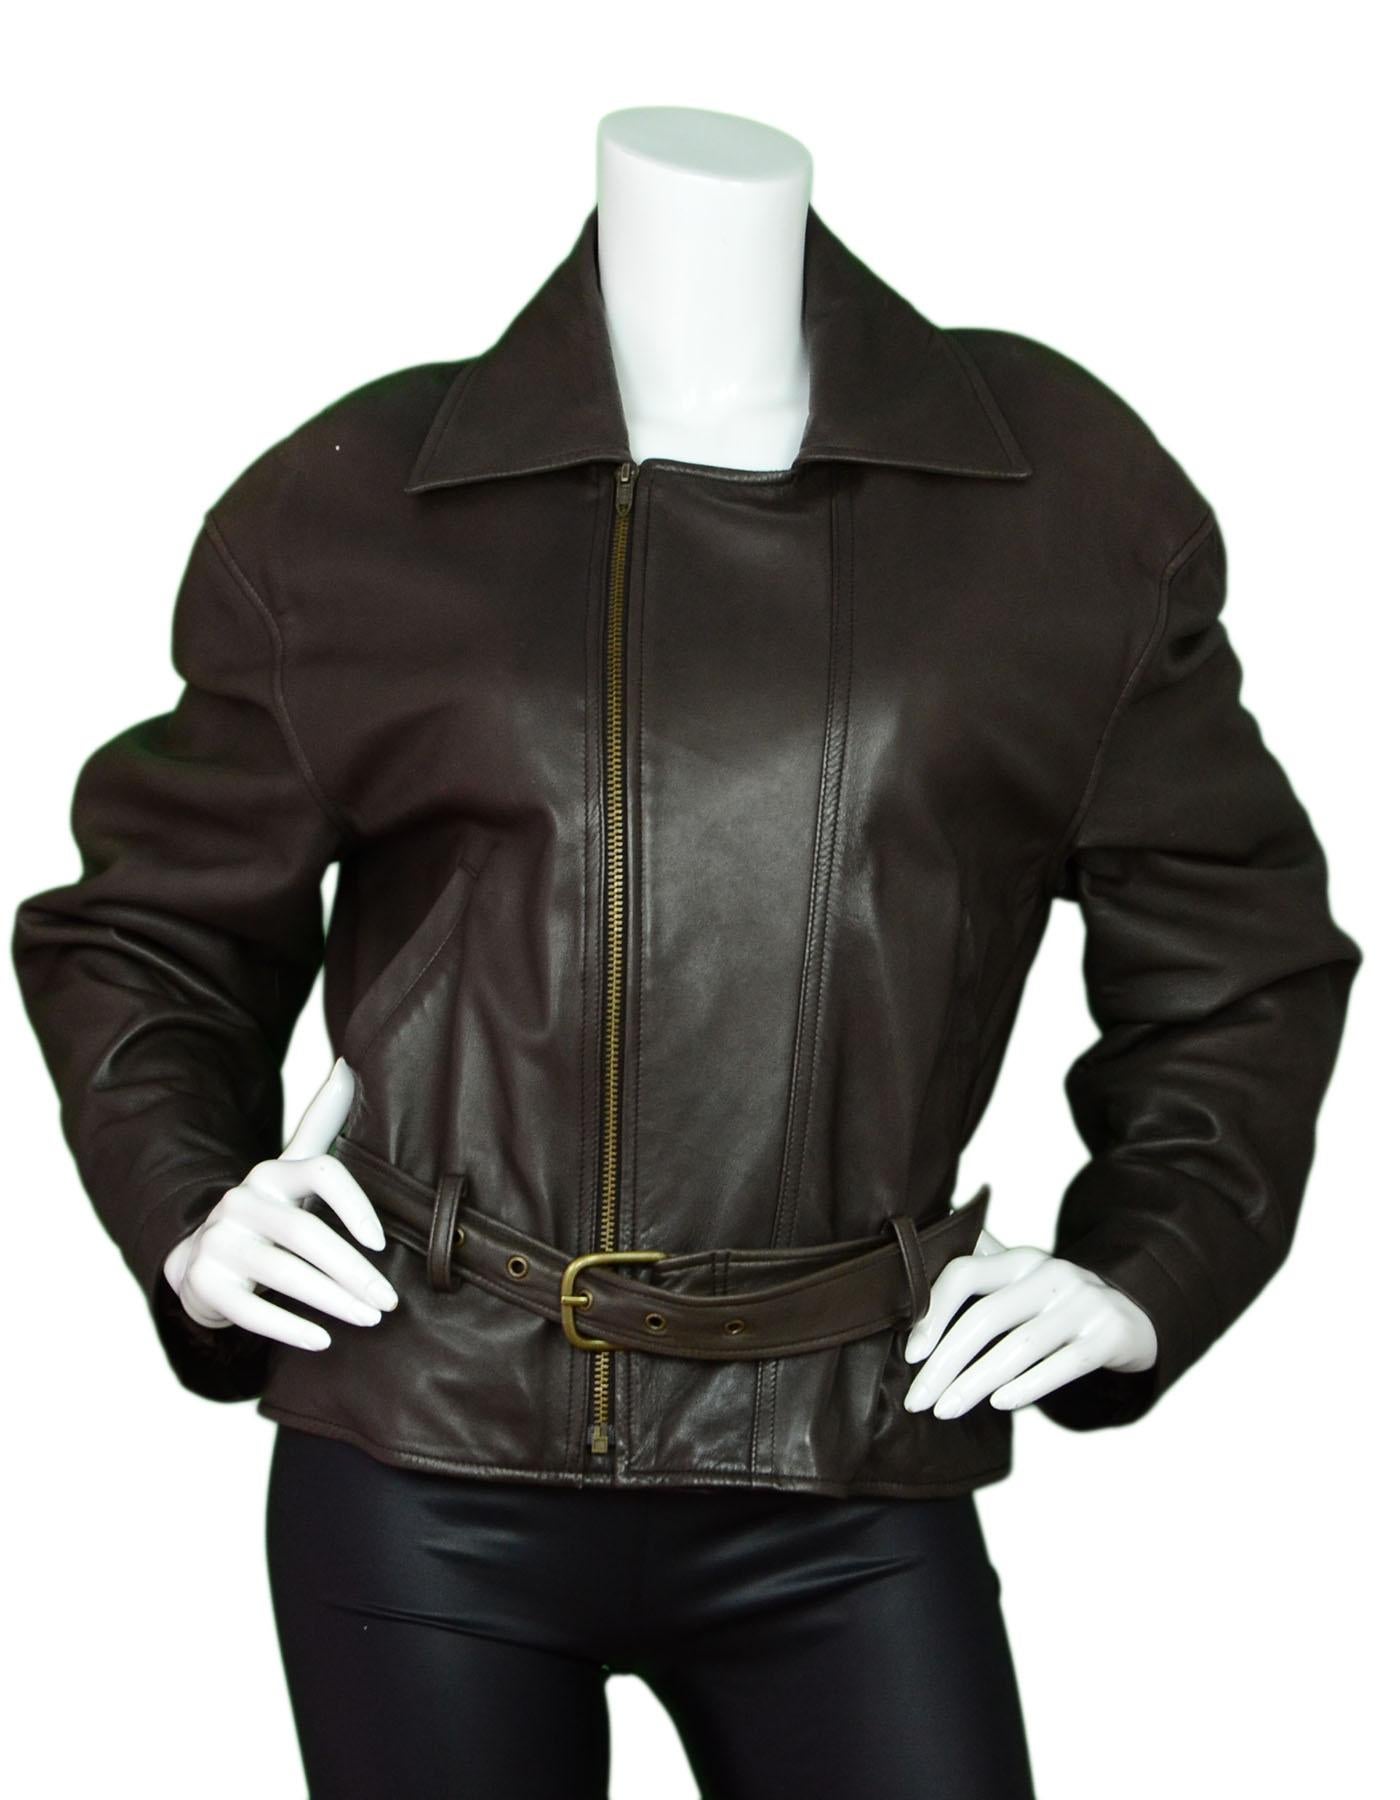 Calvin Klein Collection Brown Leather Jacket

Color: Brown
Composition: 100% leather
Closure/Opening: Front zip closure
Exterior Pockets: Side zip and slit pockets
Interior Pockets: None
Overall Condition: Excellent pre-owned condition with the